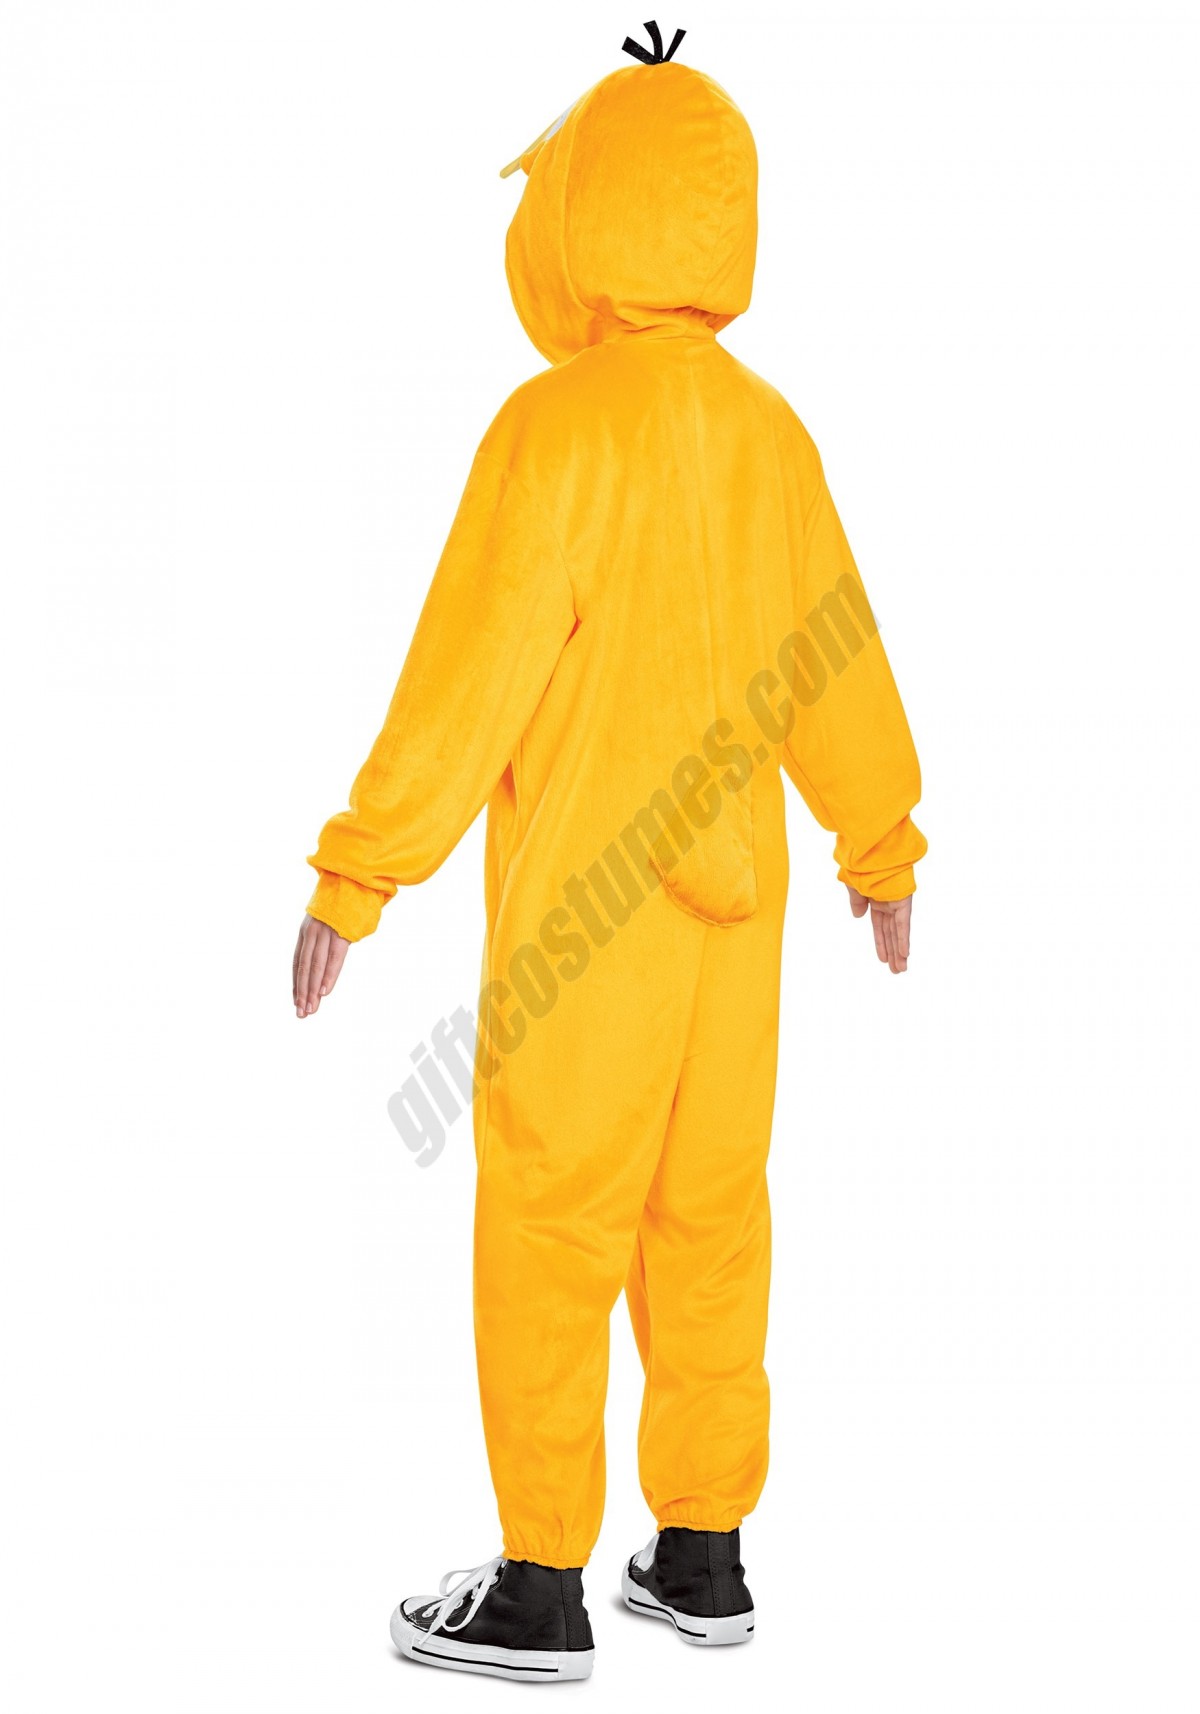 Pokemon Deluxe Psyduck Costume for Kids Promotions - -1